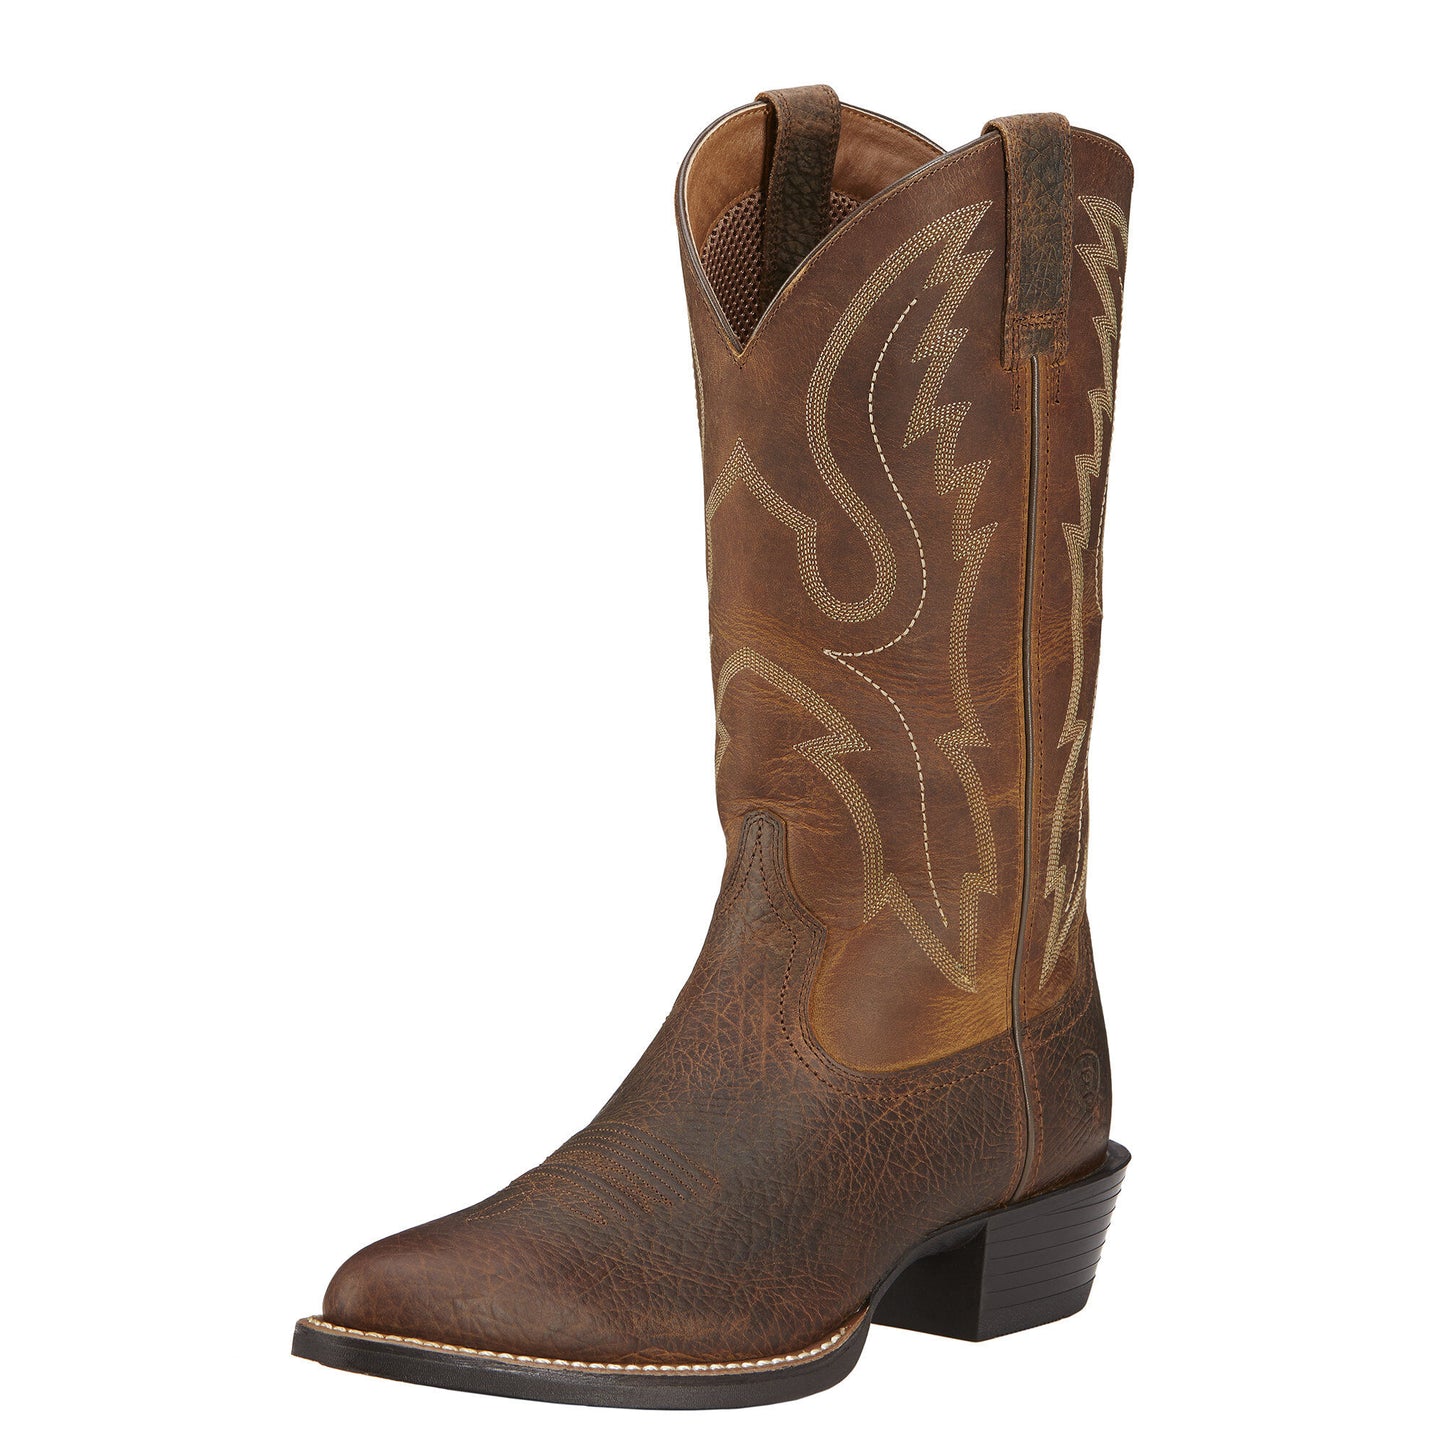 Ariat Men's Sport R Toe Boot - Earth/Sable - French's Boots